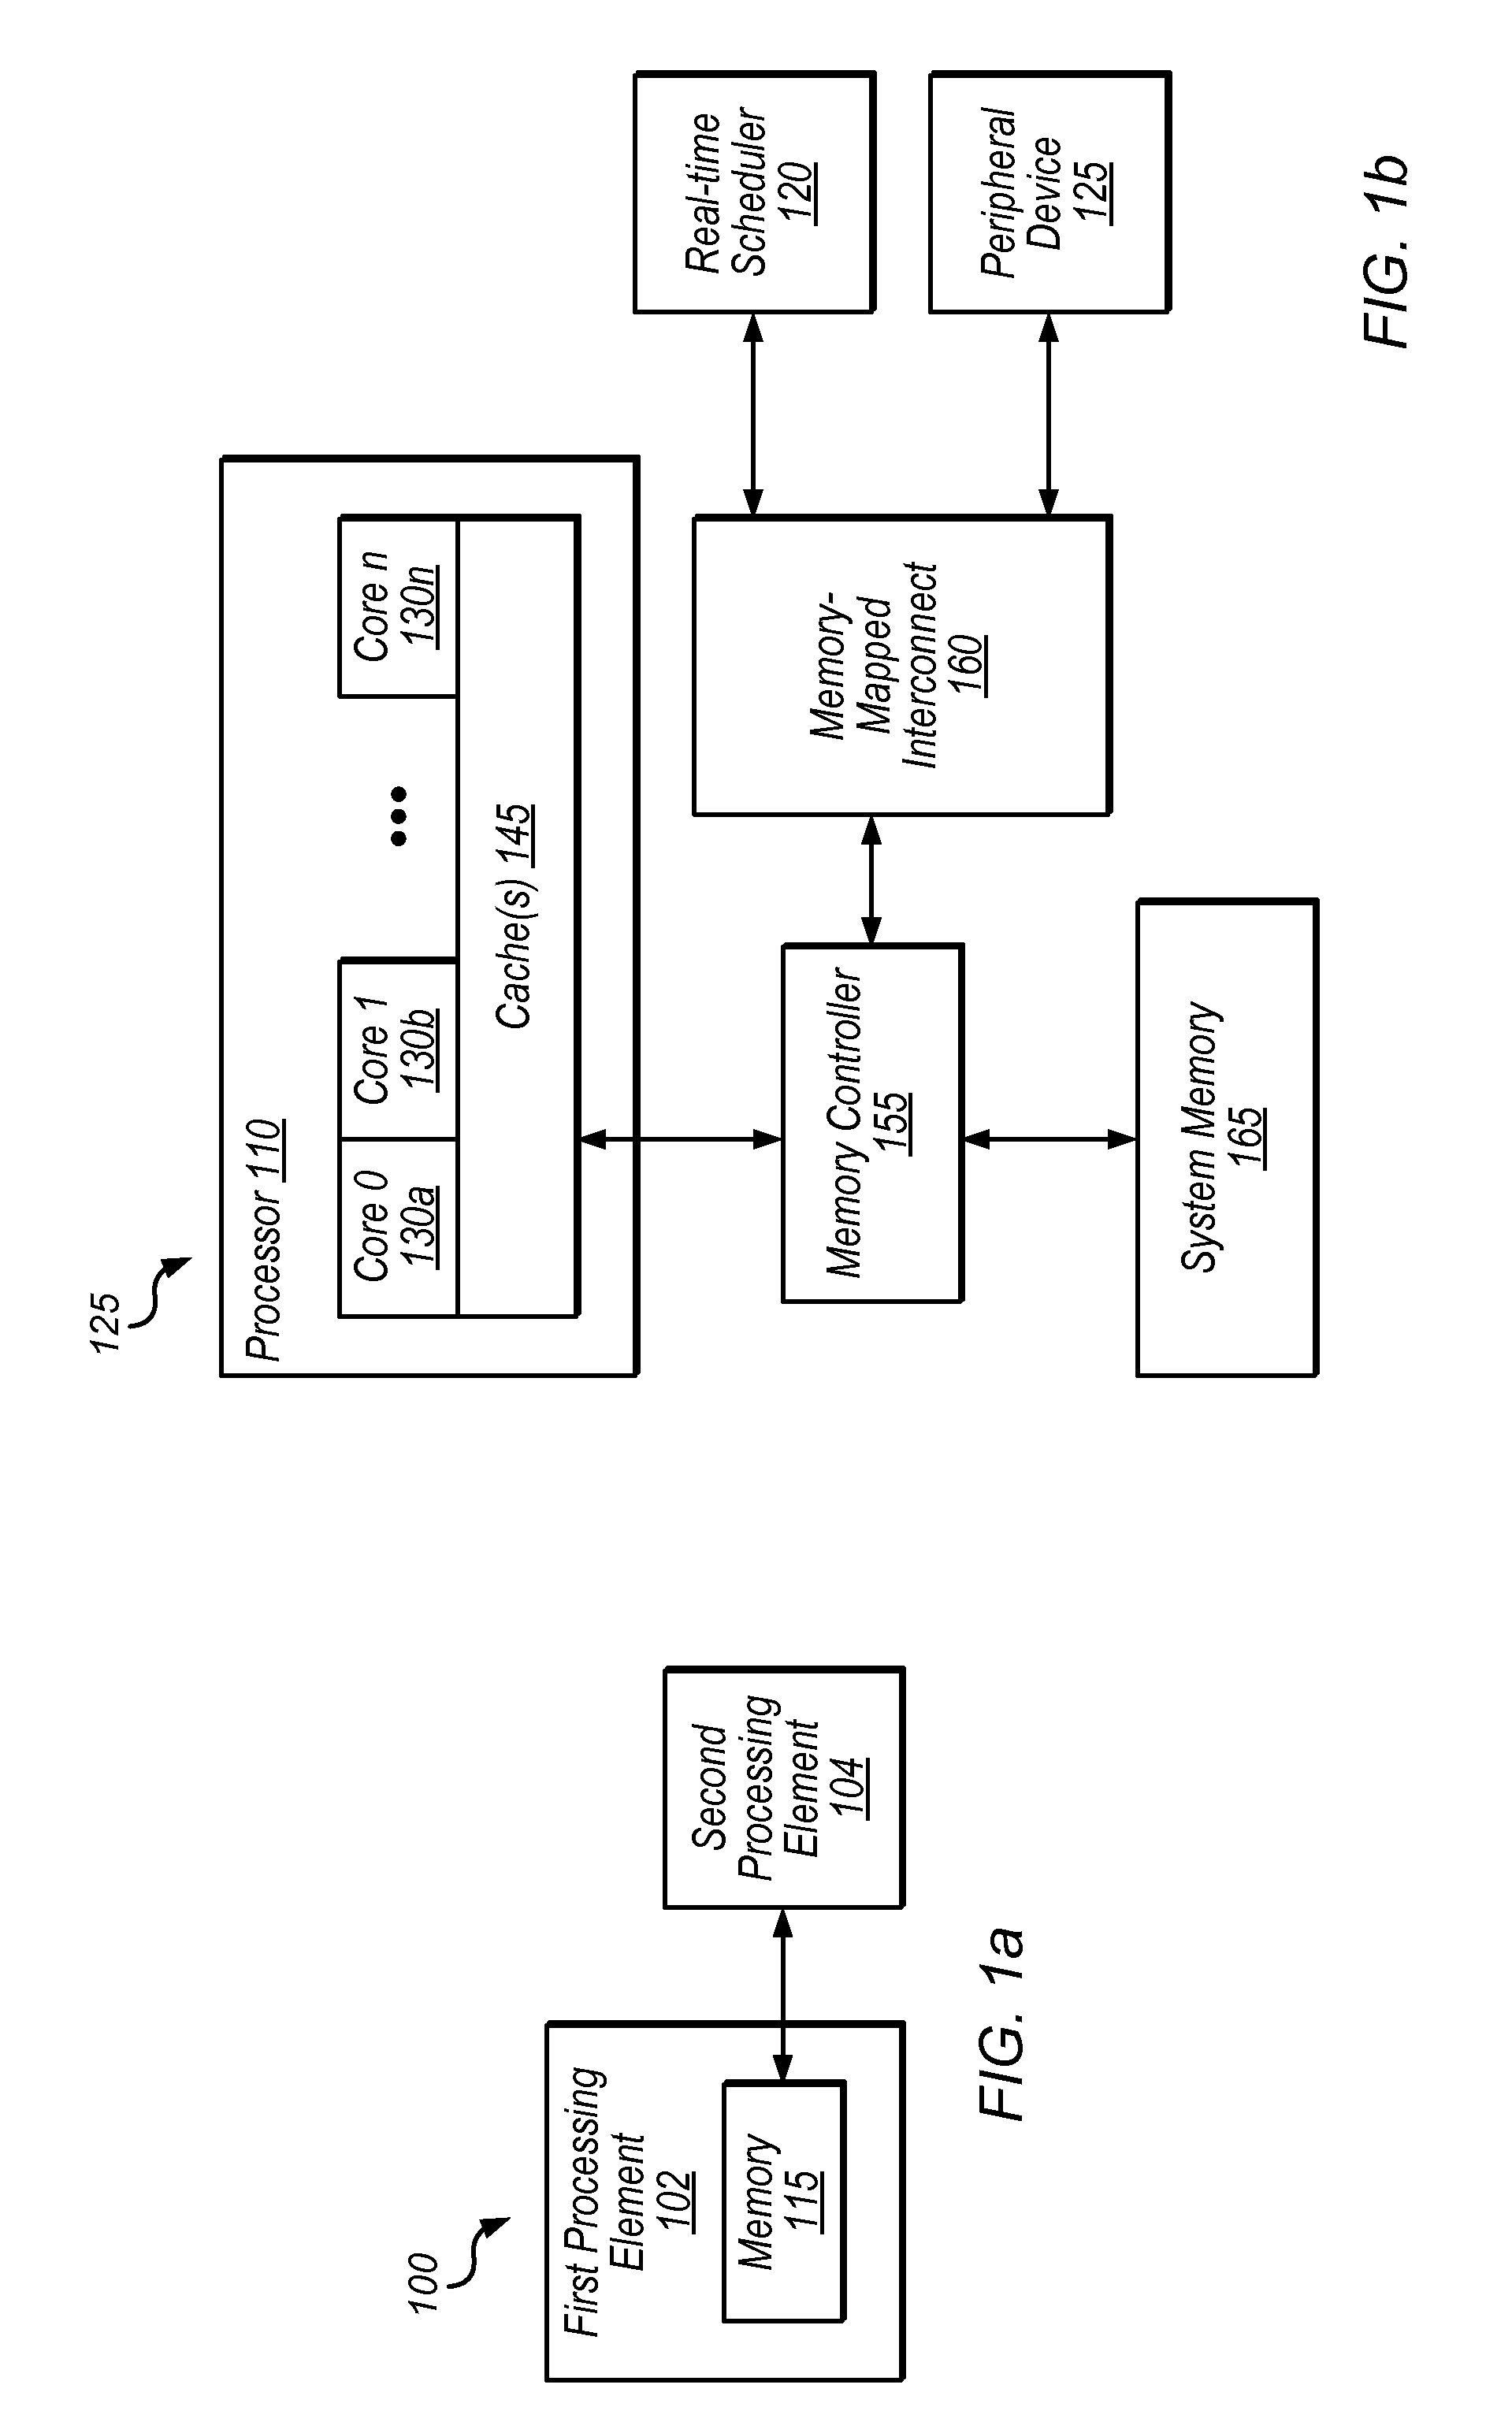 Hardware assisted real-time scheduler using memory monitoring